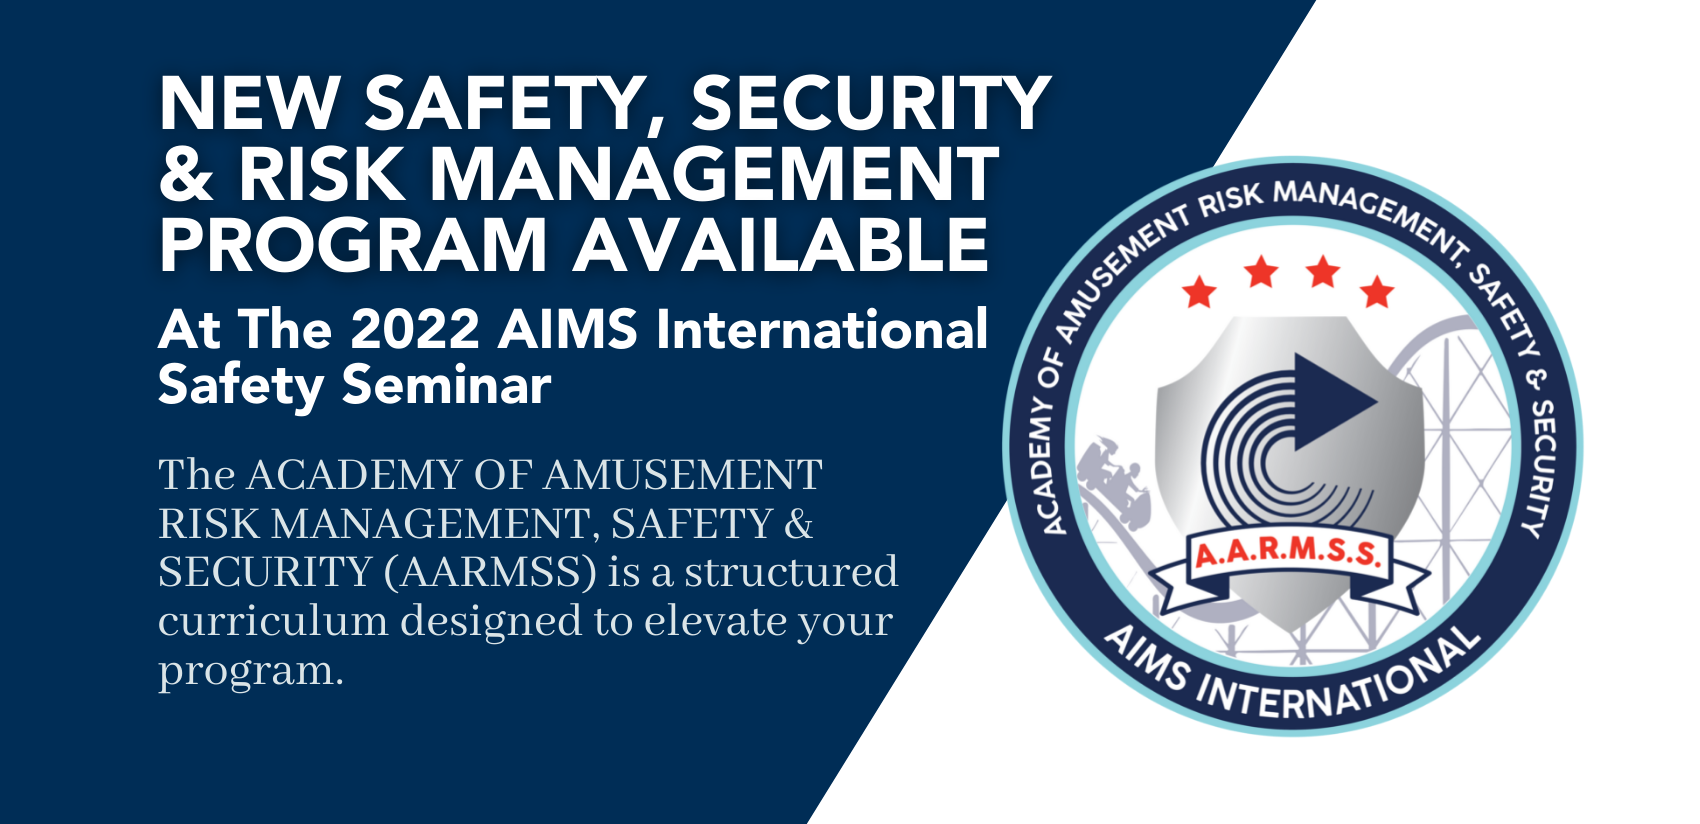 Academy of Amusement Risk Management, Safety & Security